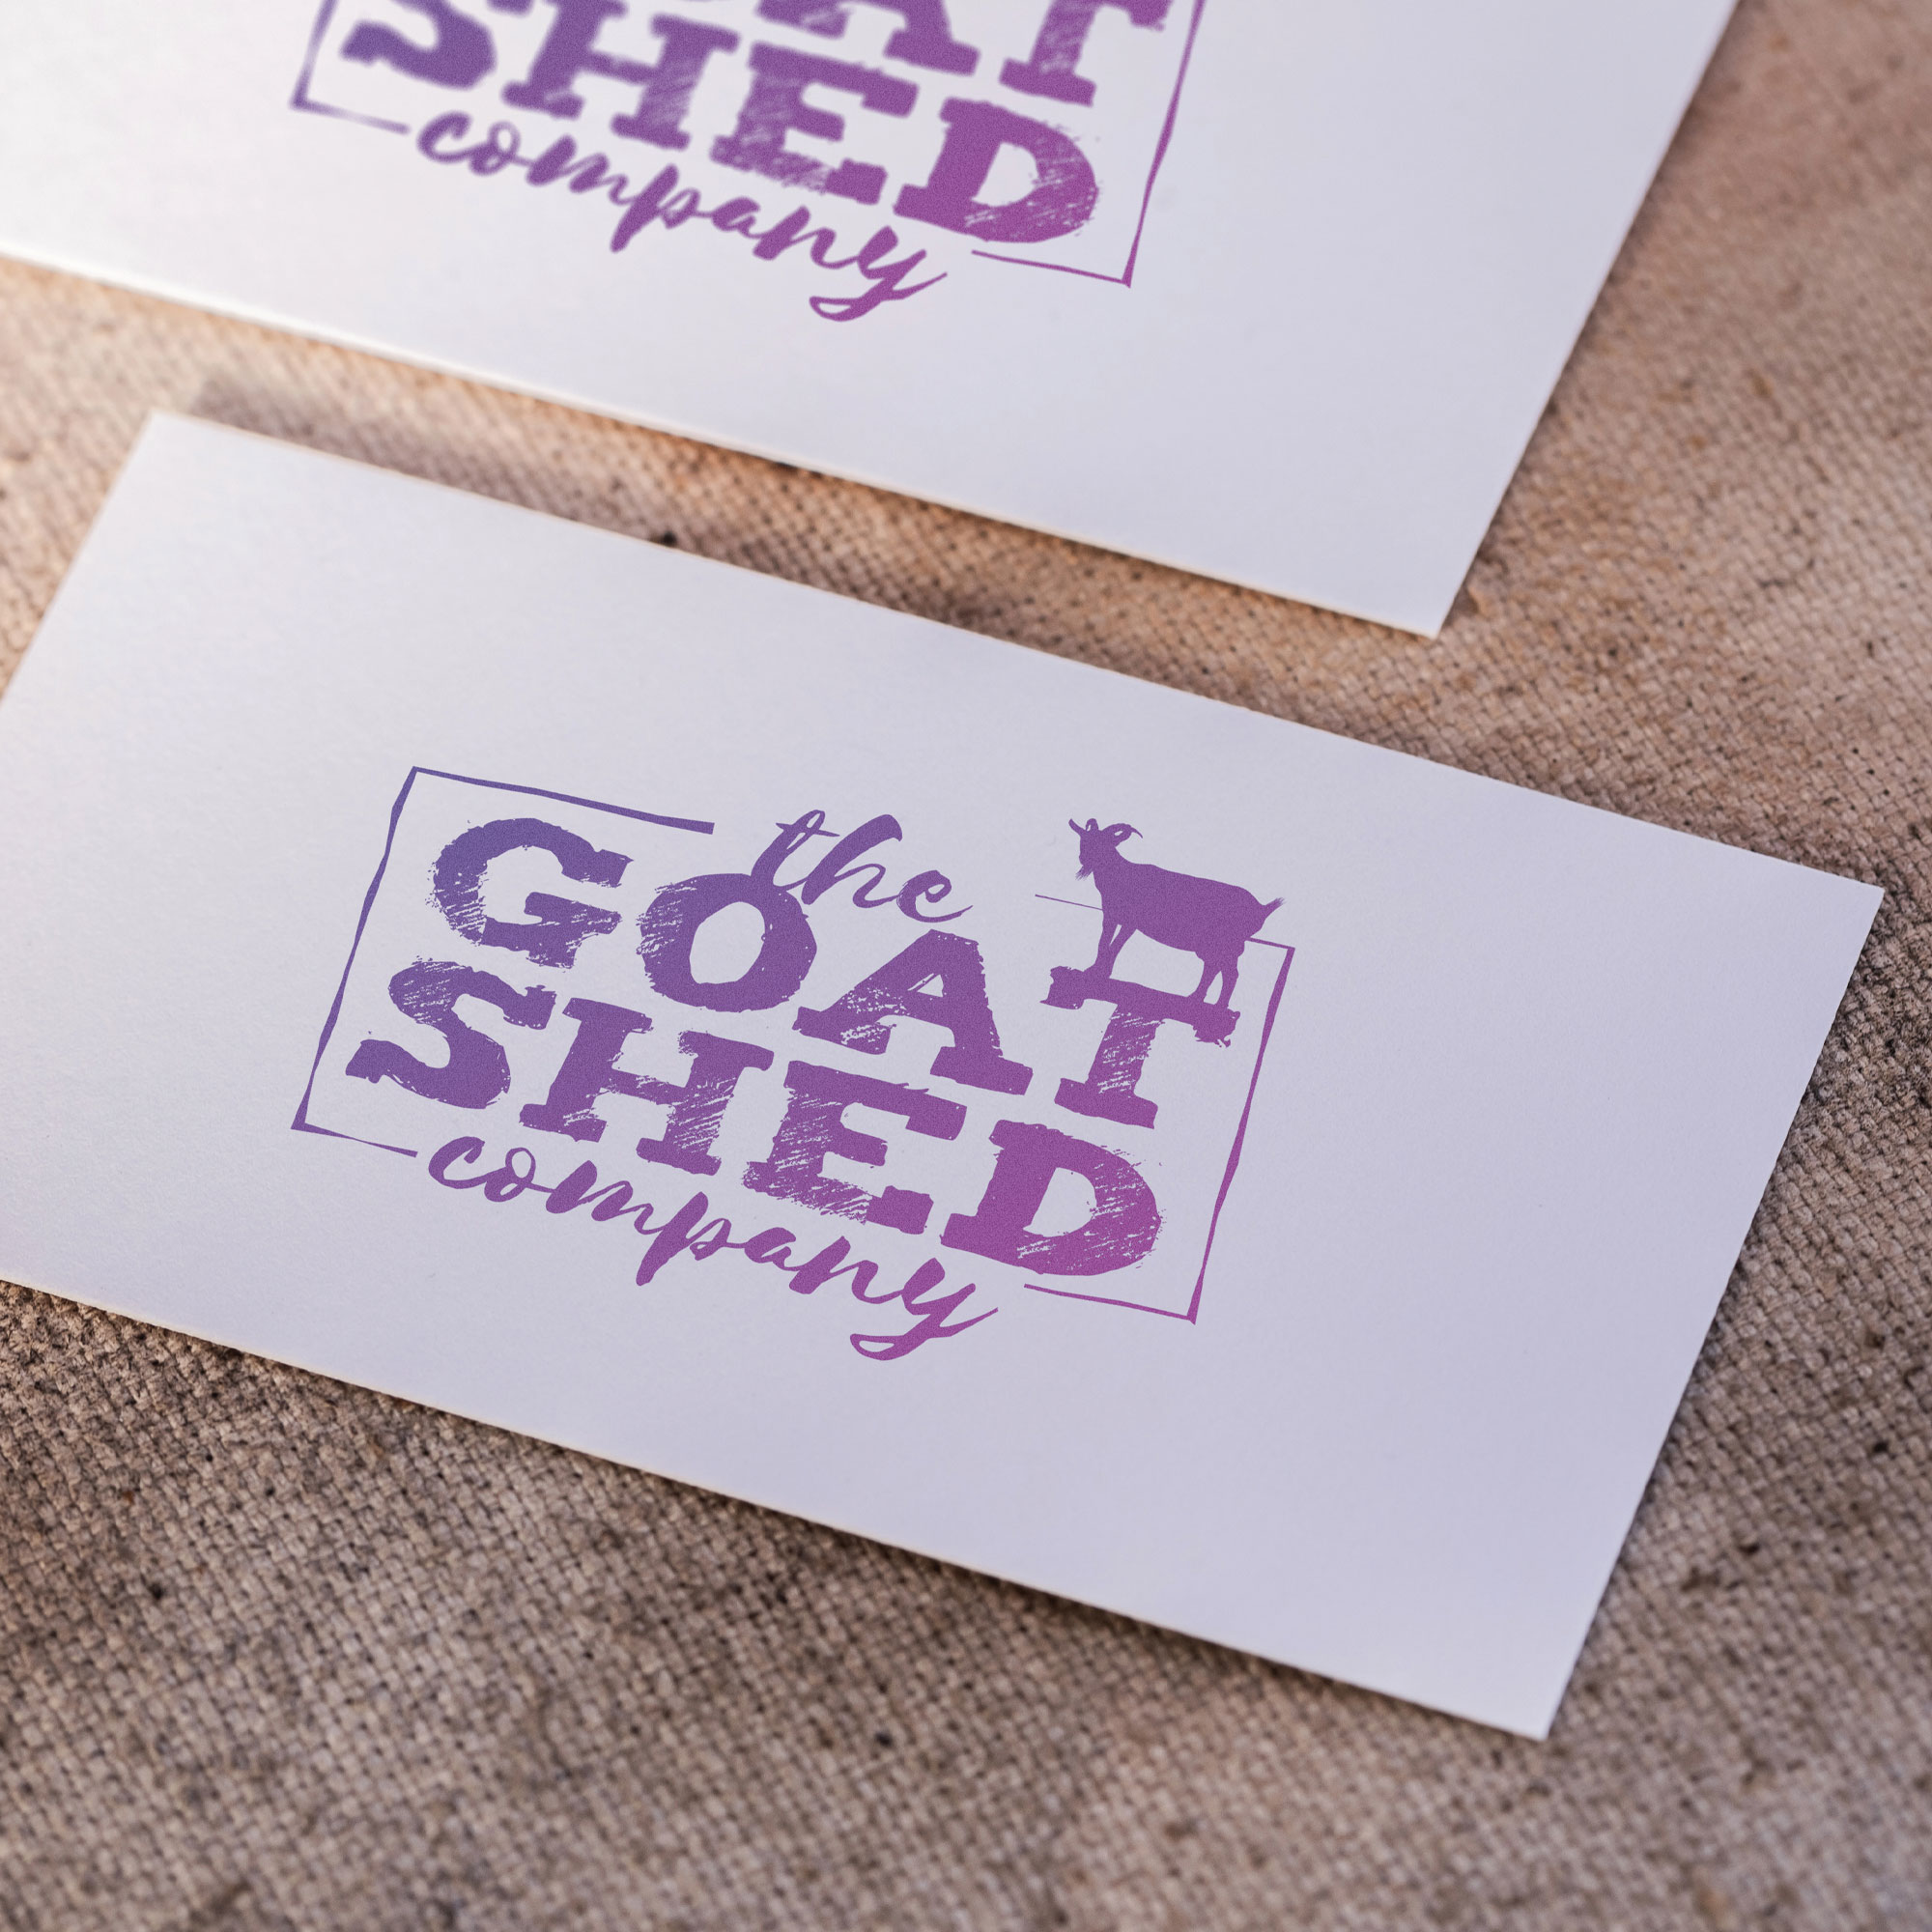 The Goat Shed Company Branding Design